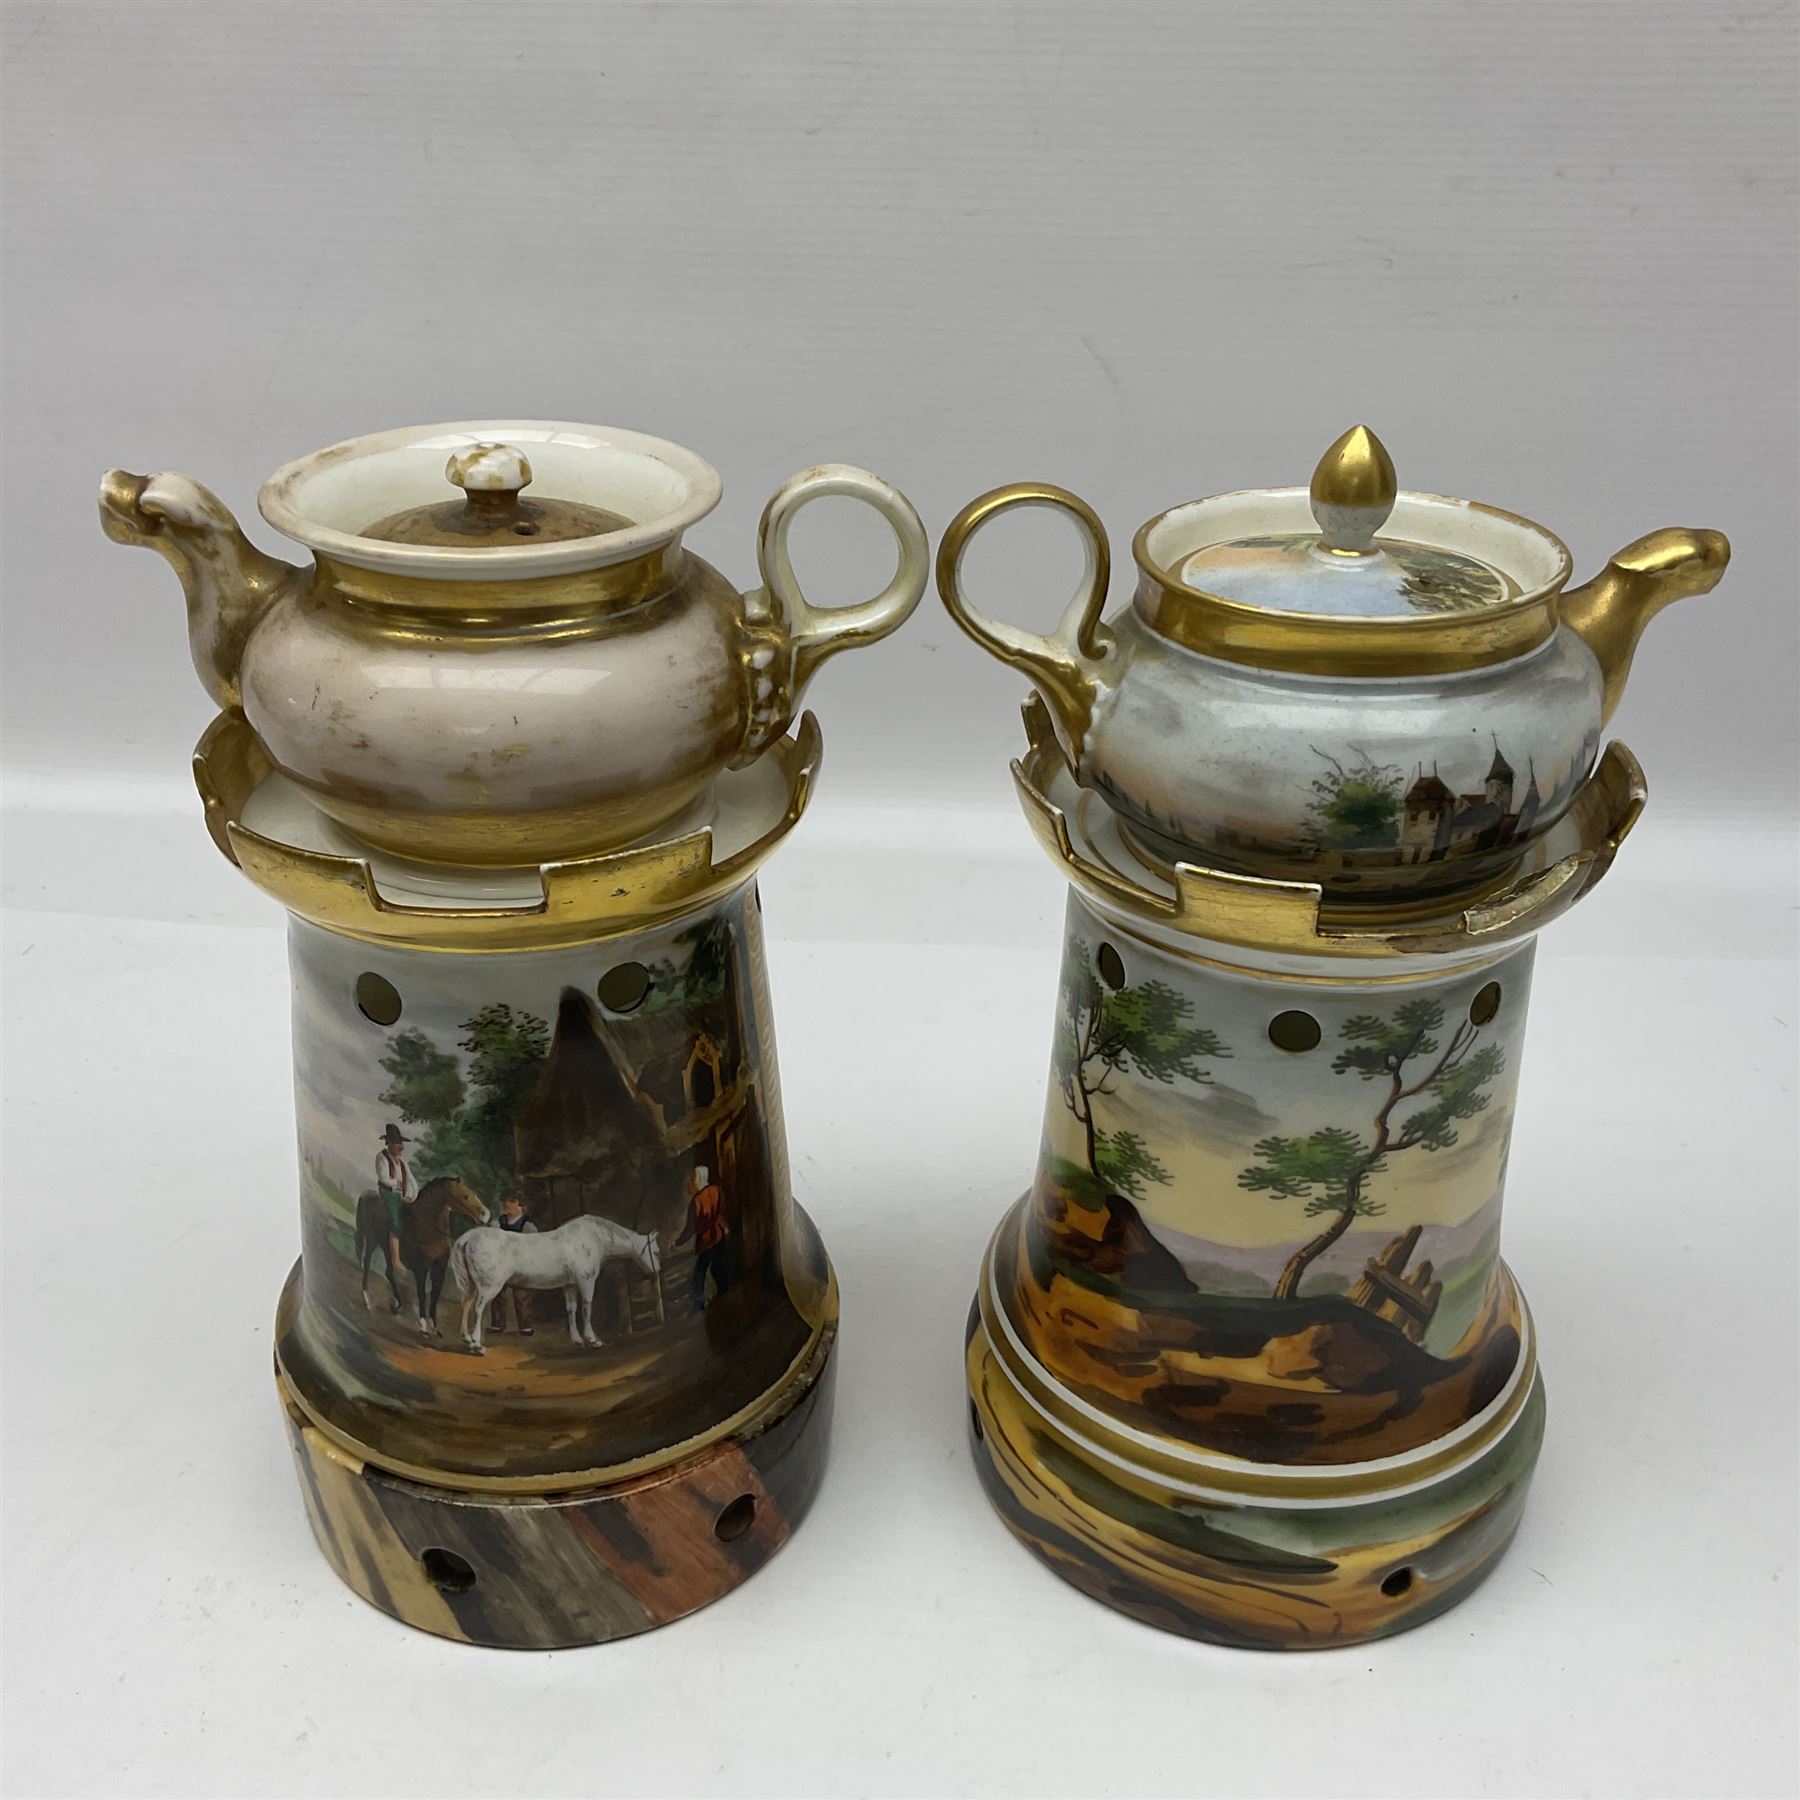 Two 19th century continental teapots and warmers - Image 2 of 20